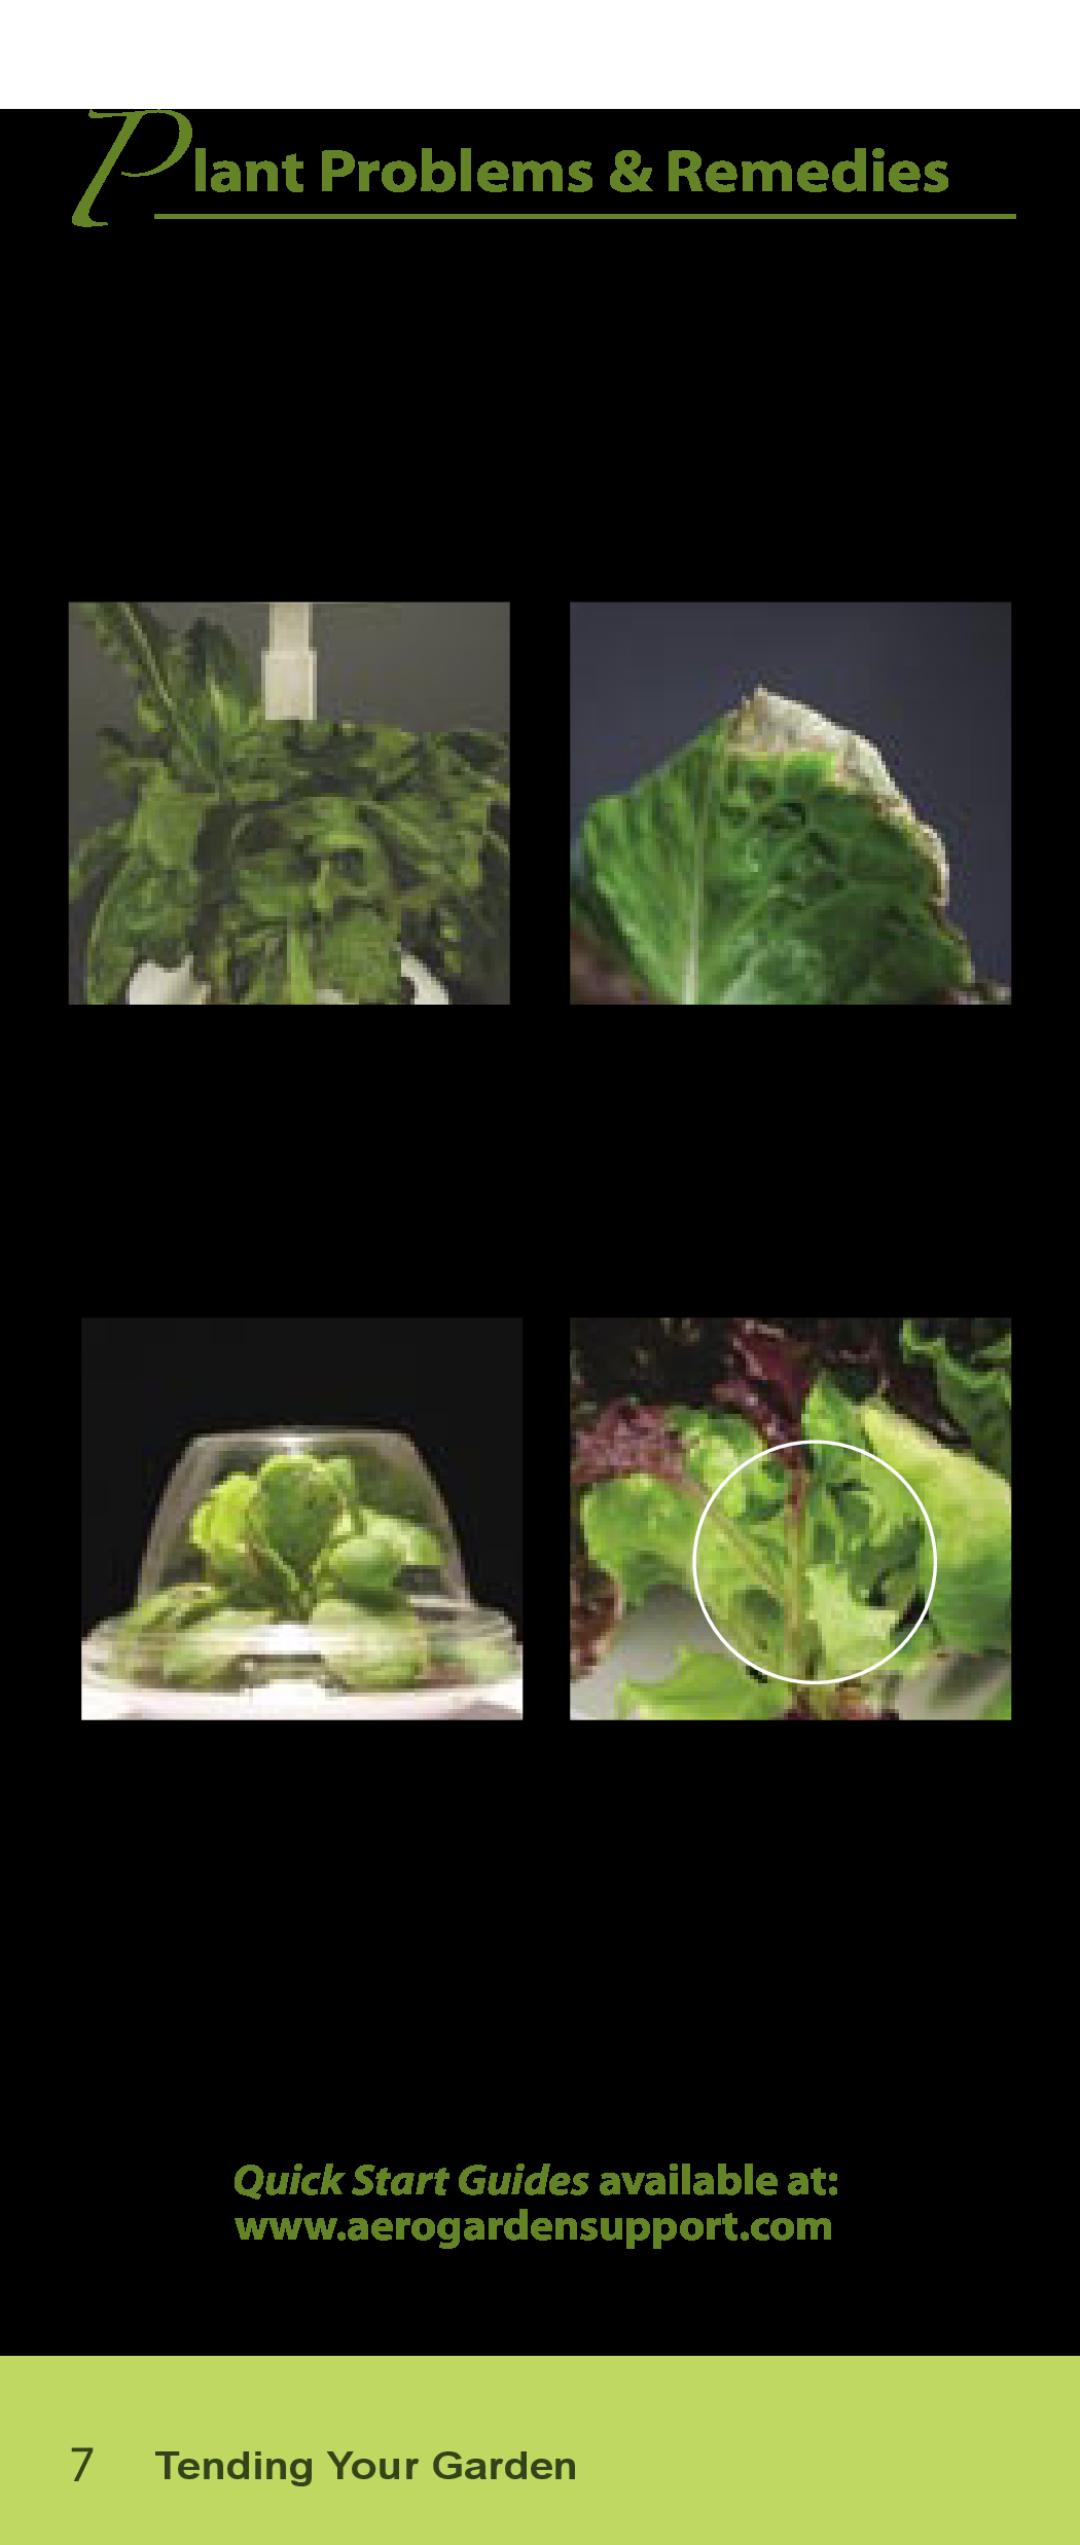 AeroGarden Salad Series manual P lant Problems & Remedies, Tending Your Garden, Wilted, Burned, Curled Inside Dome, Bolting 